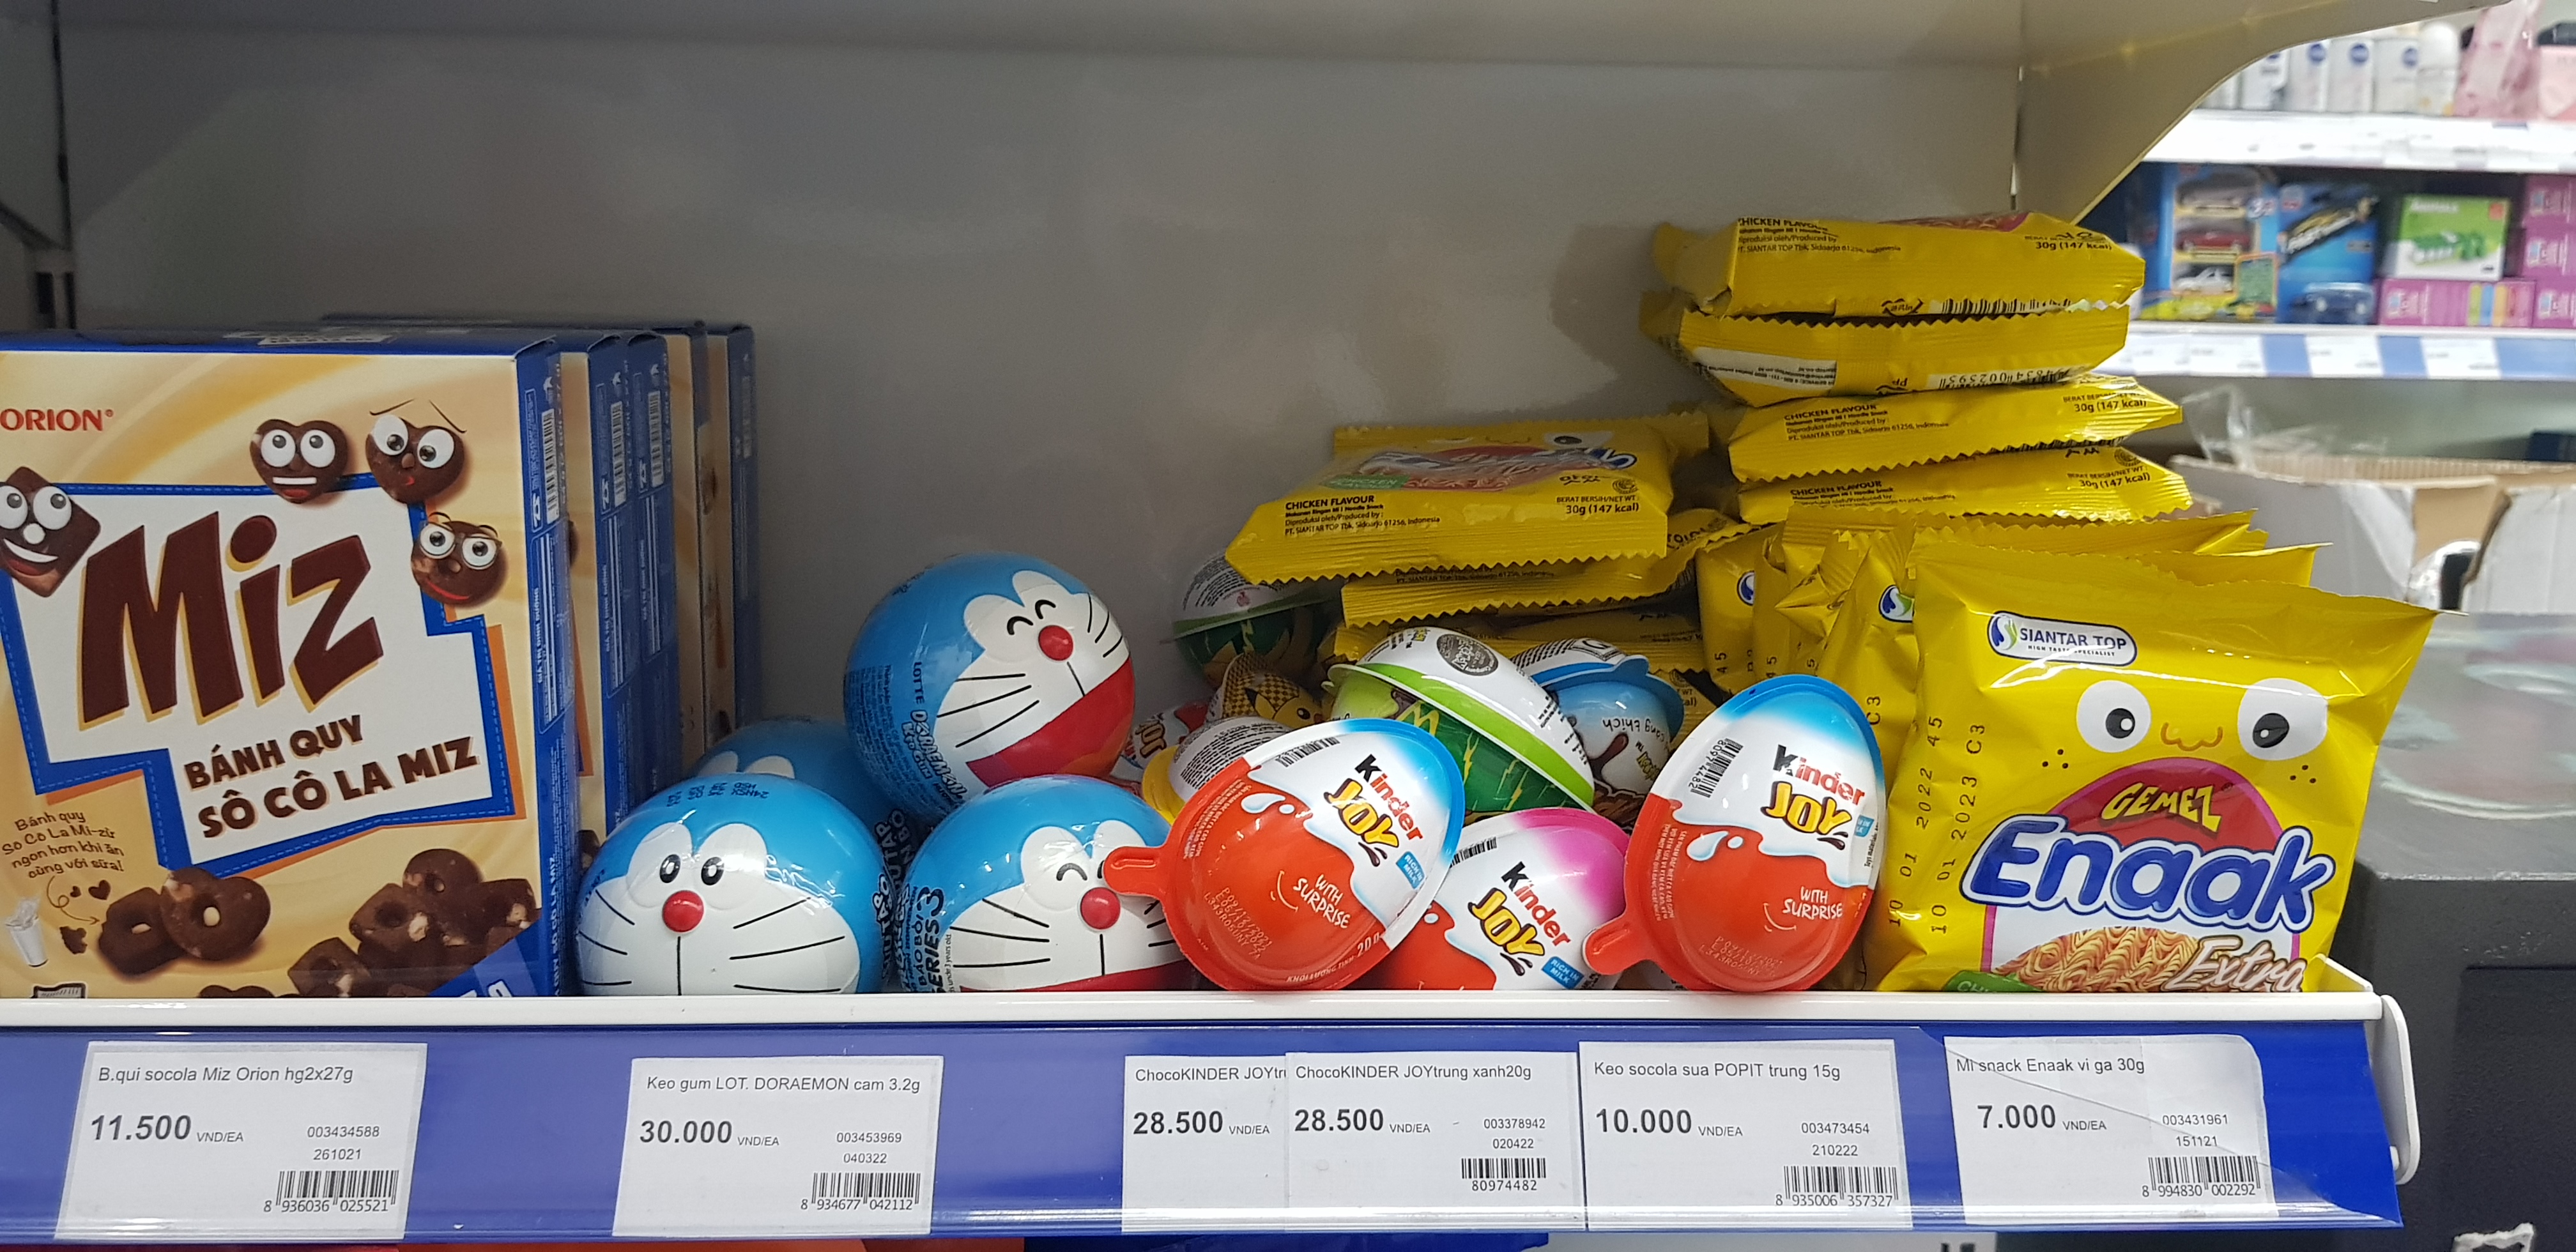 Ho Chi Minh City food safety agency plans to inspect Kinder Surprise products over salmonella concerns